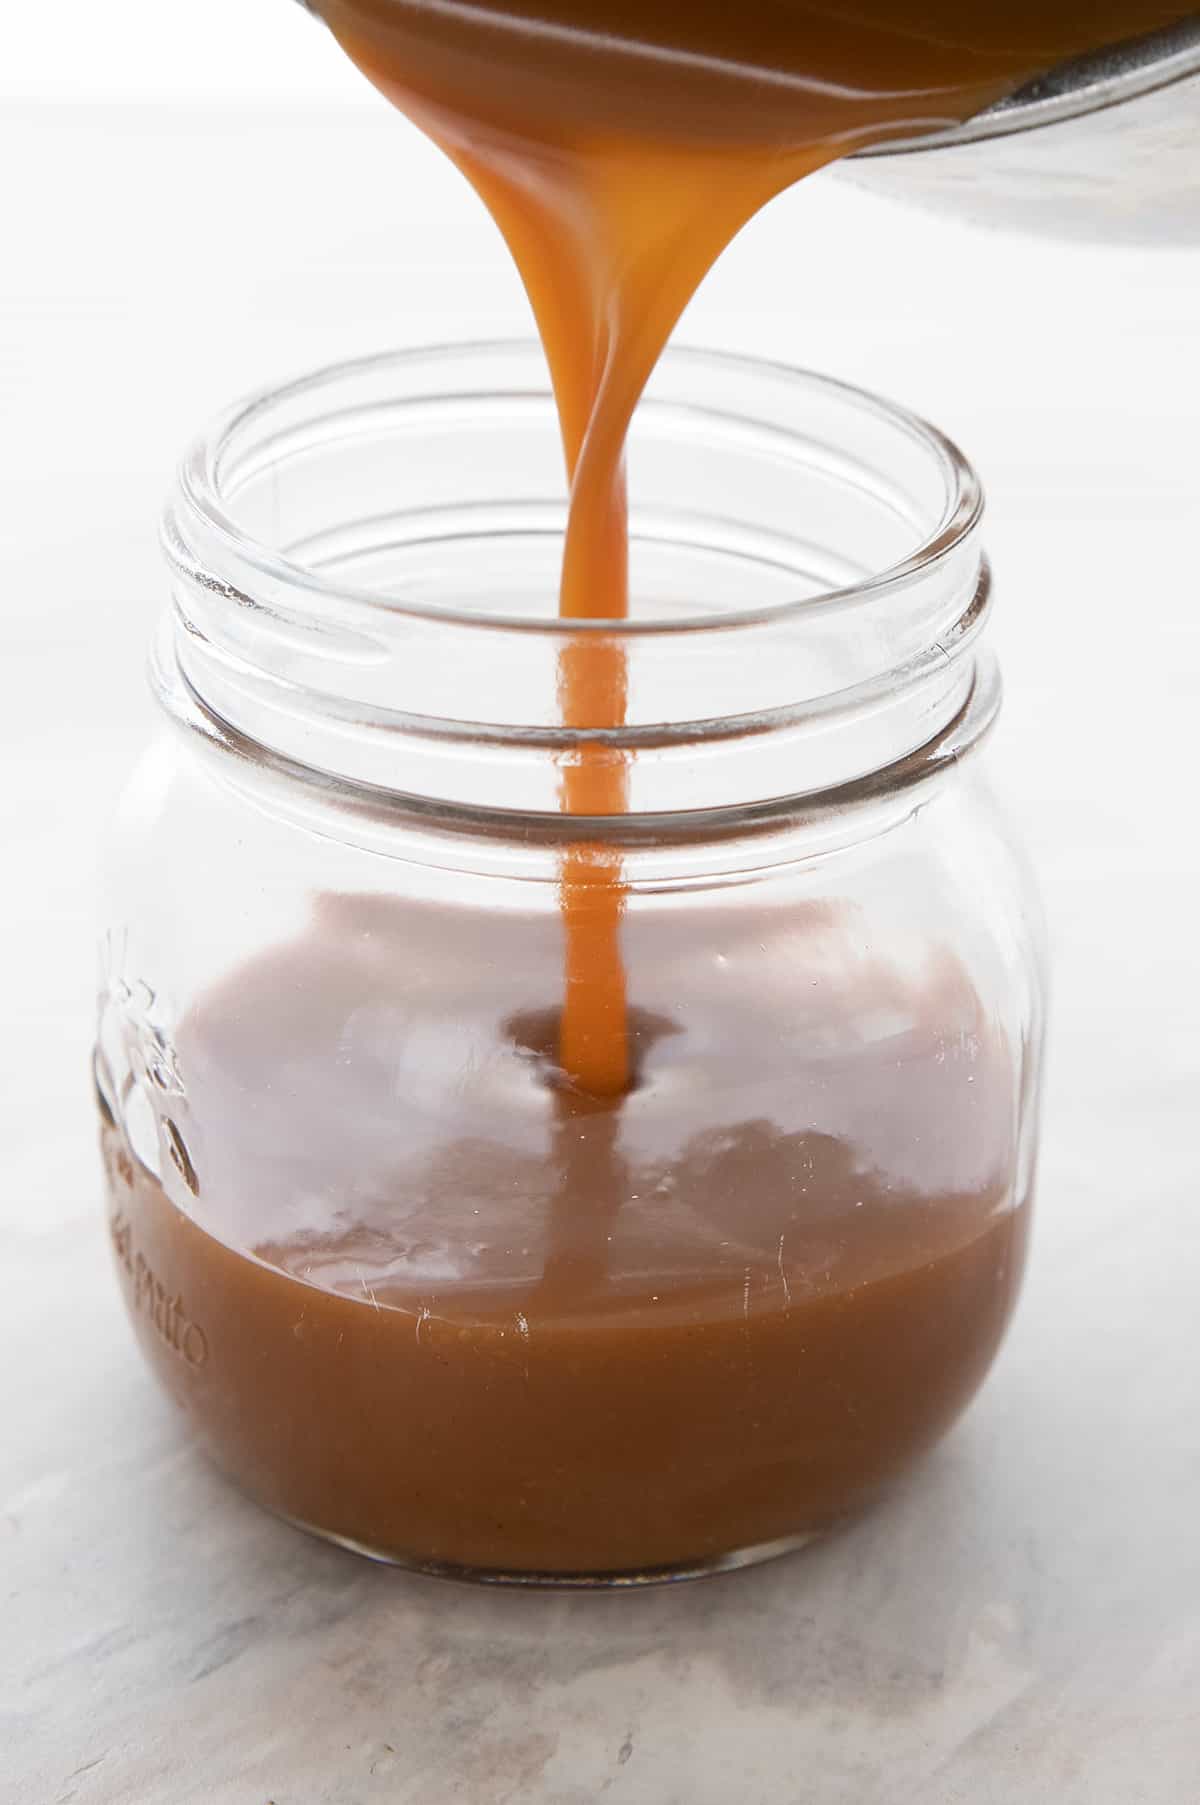 Keto dulce de leche being poured from a pan into a glass jar.